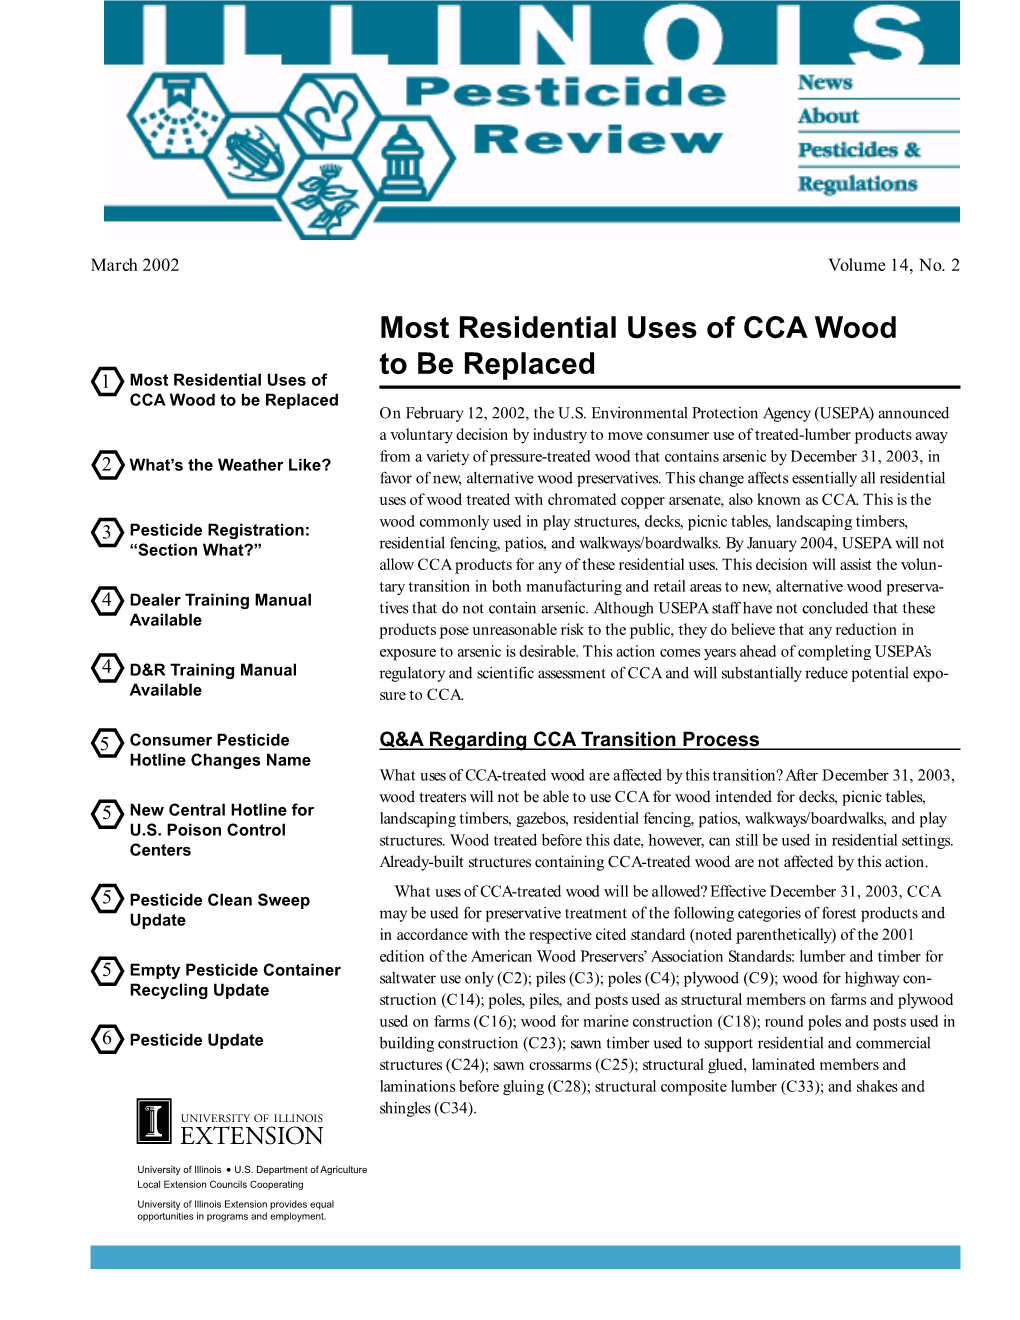 Most Residential Uses of CCA Wood to Be Replaced 1 Most Residential Uses of CCA Wood to Be Replaced on February 12, 2002, the U.S